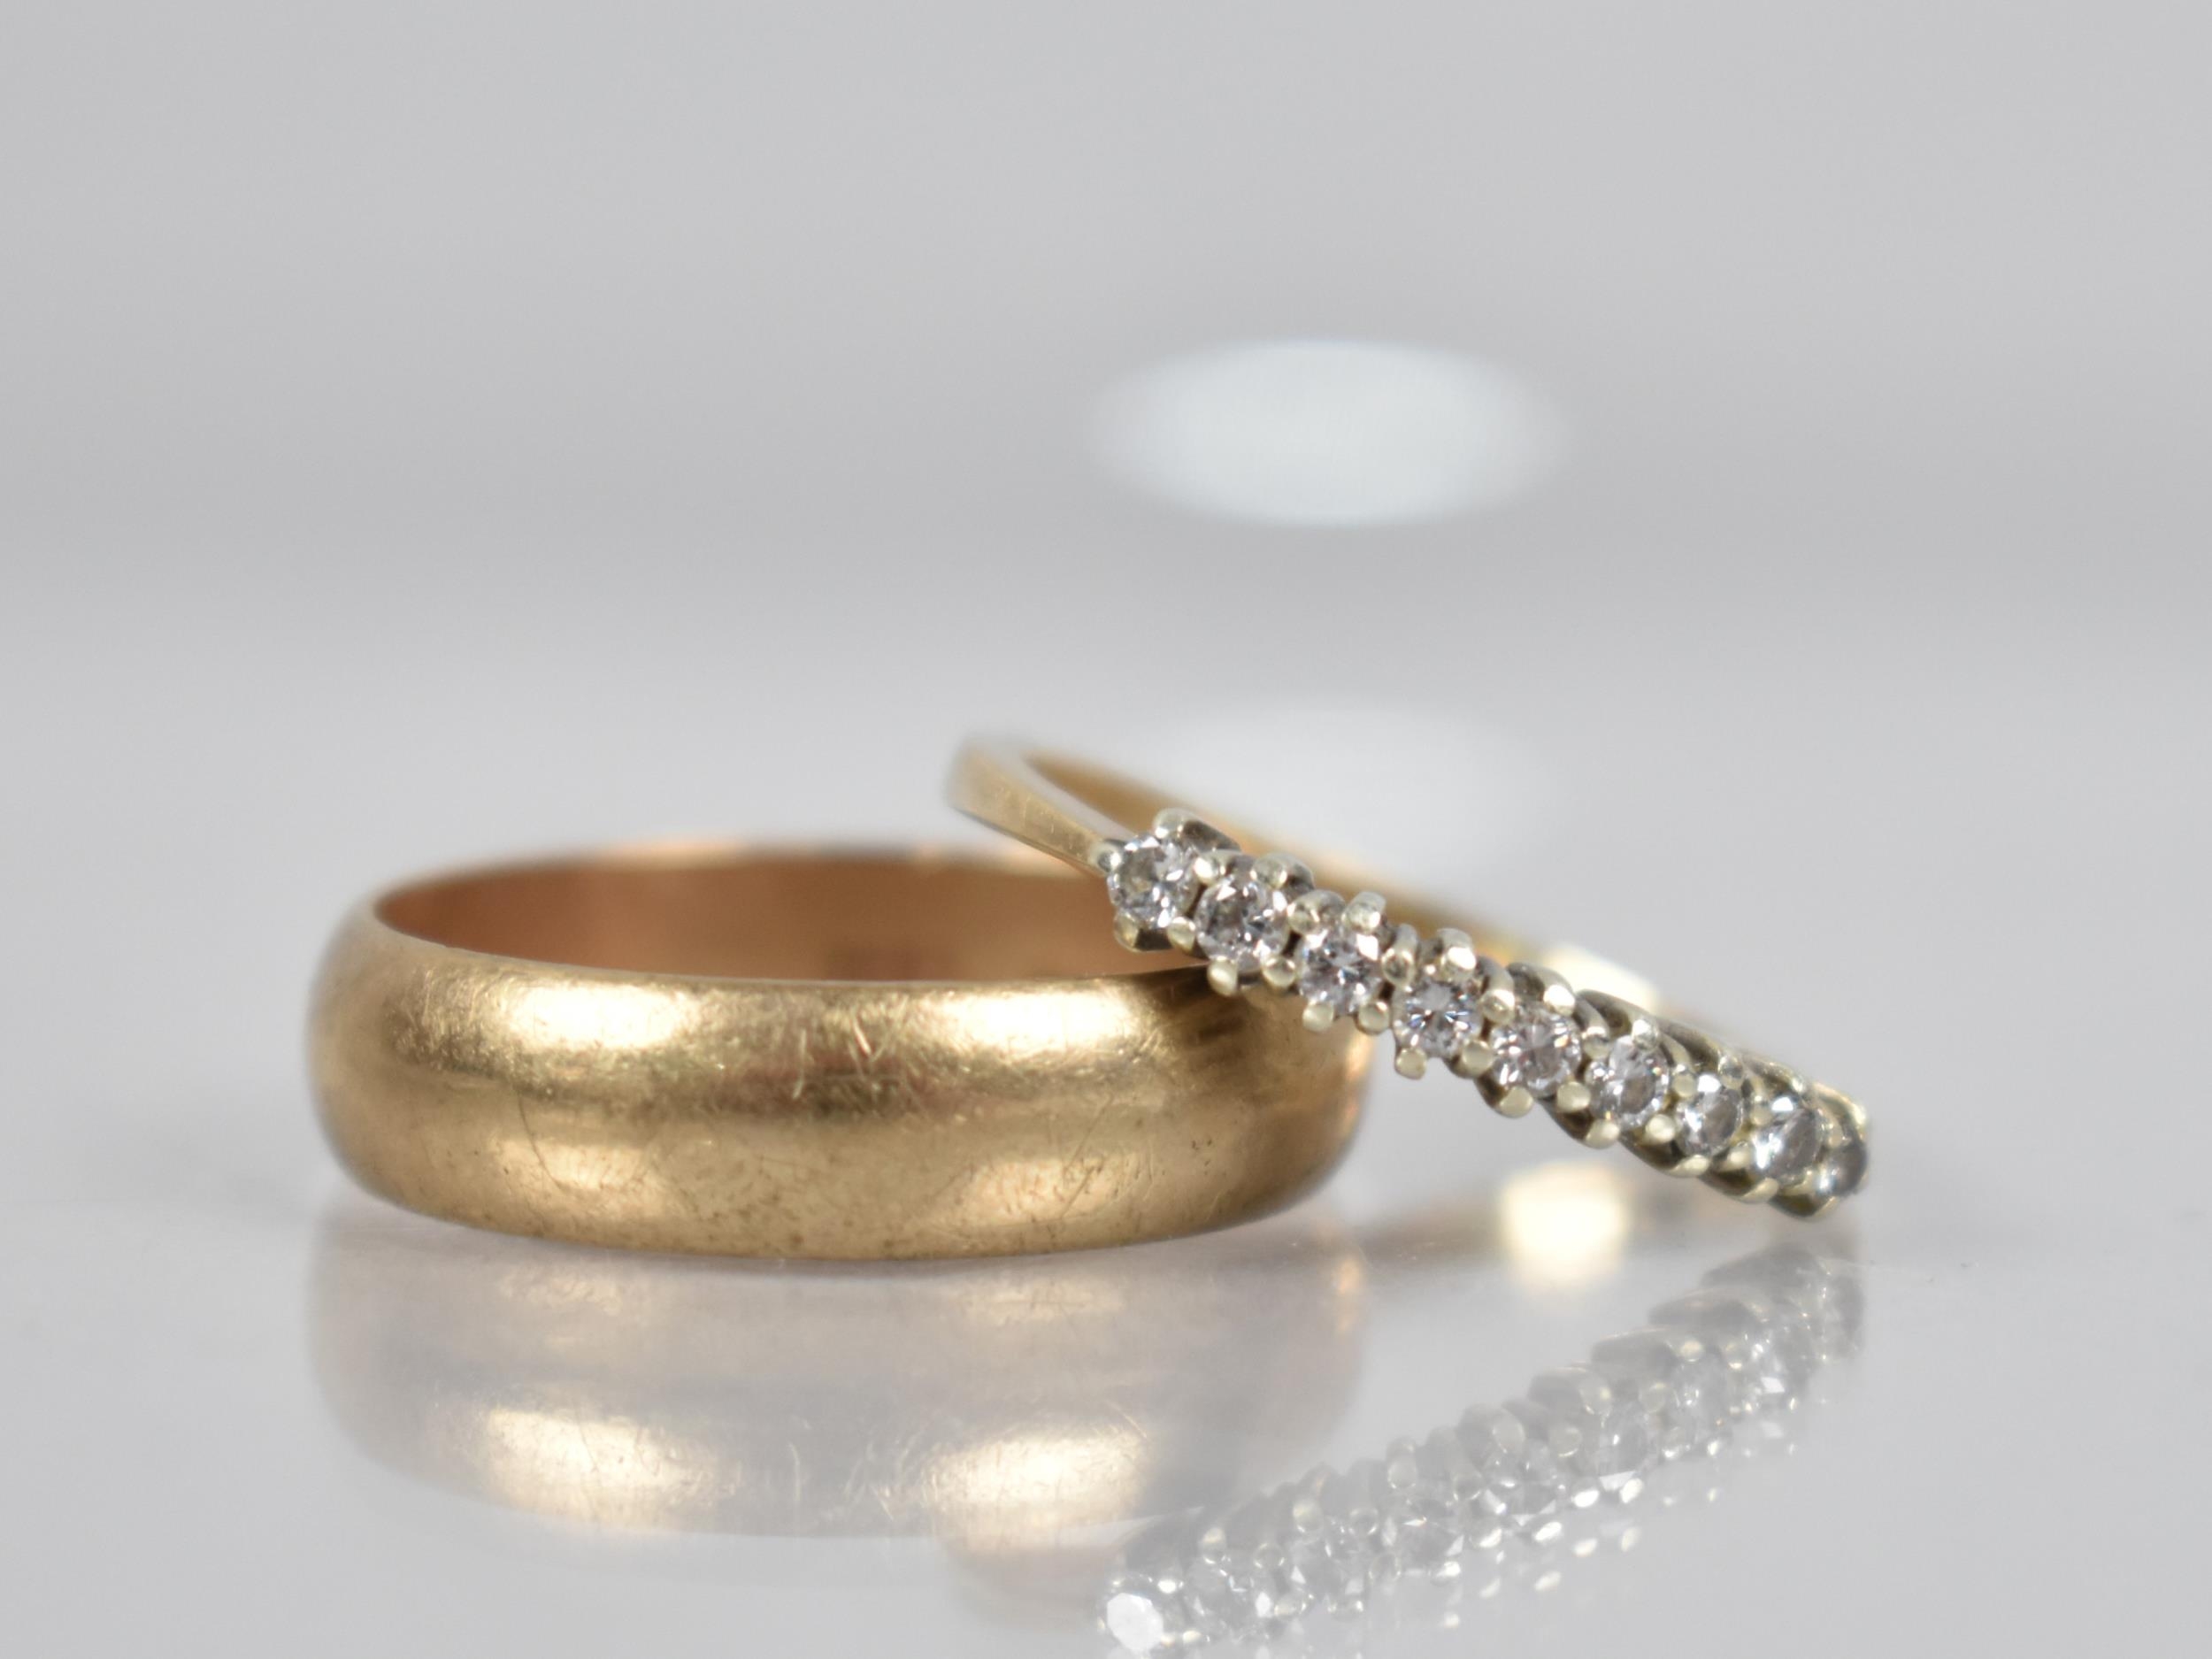 A 9ct Gold Half Eternity Ring, Mounted with Round Brilliant Cut Diamonds in White Metal to a Plain